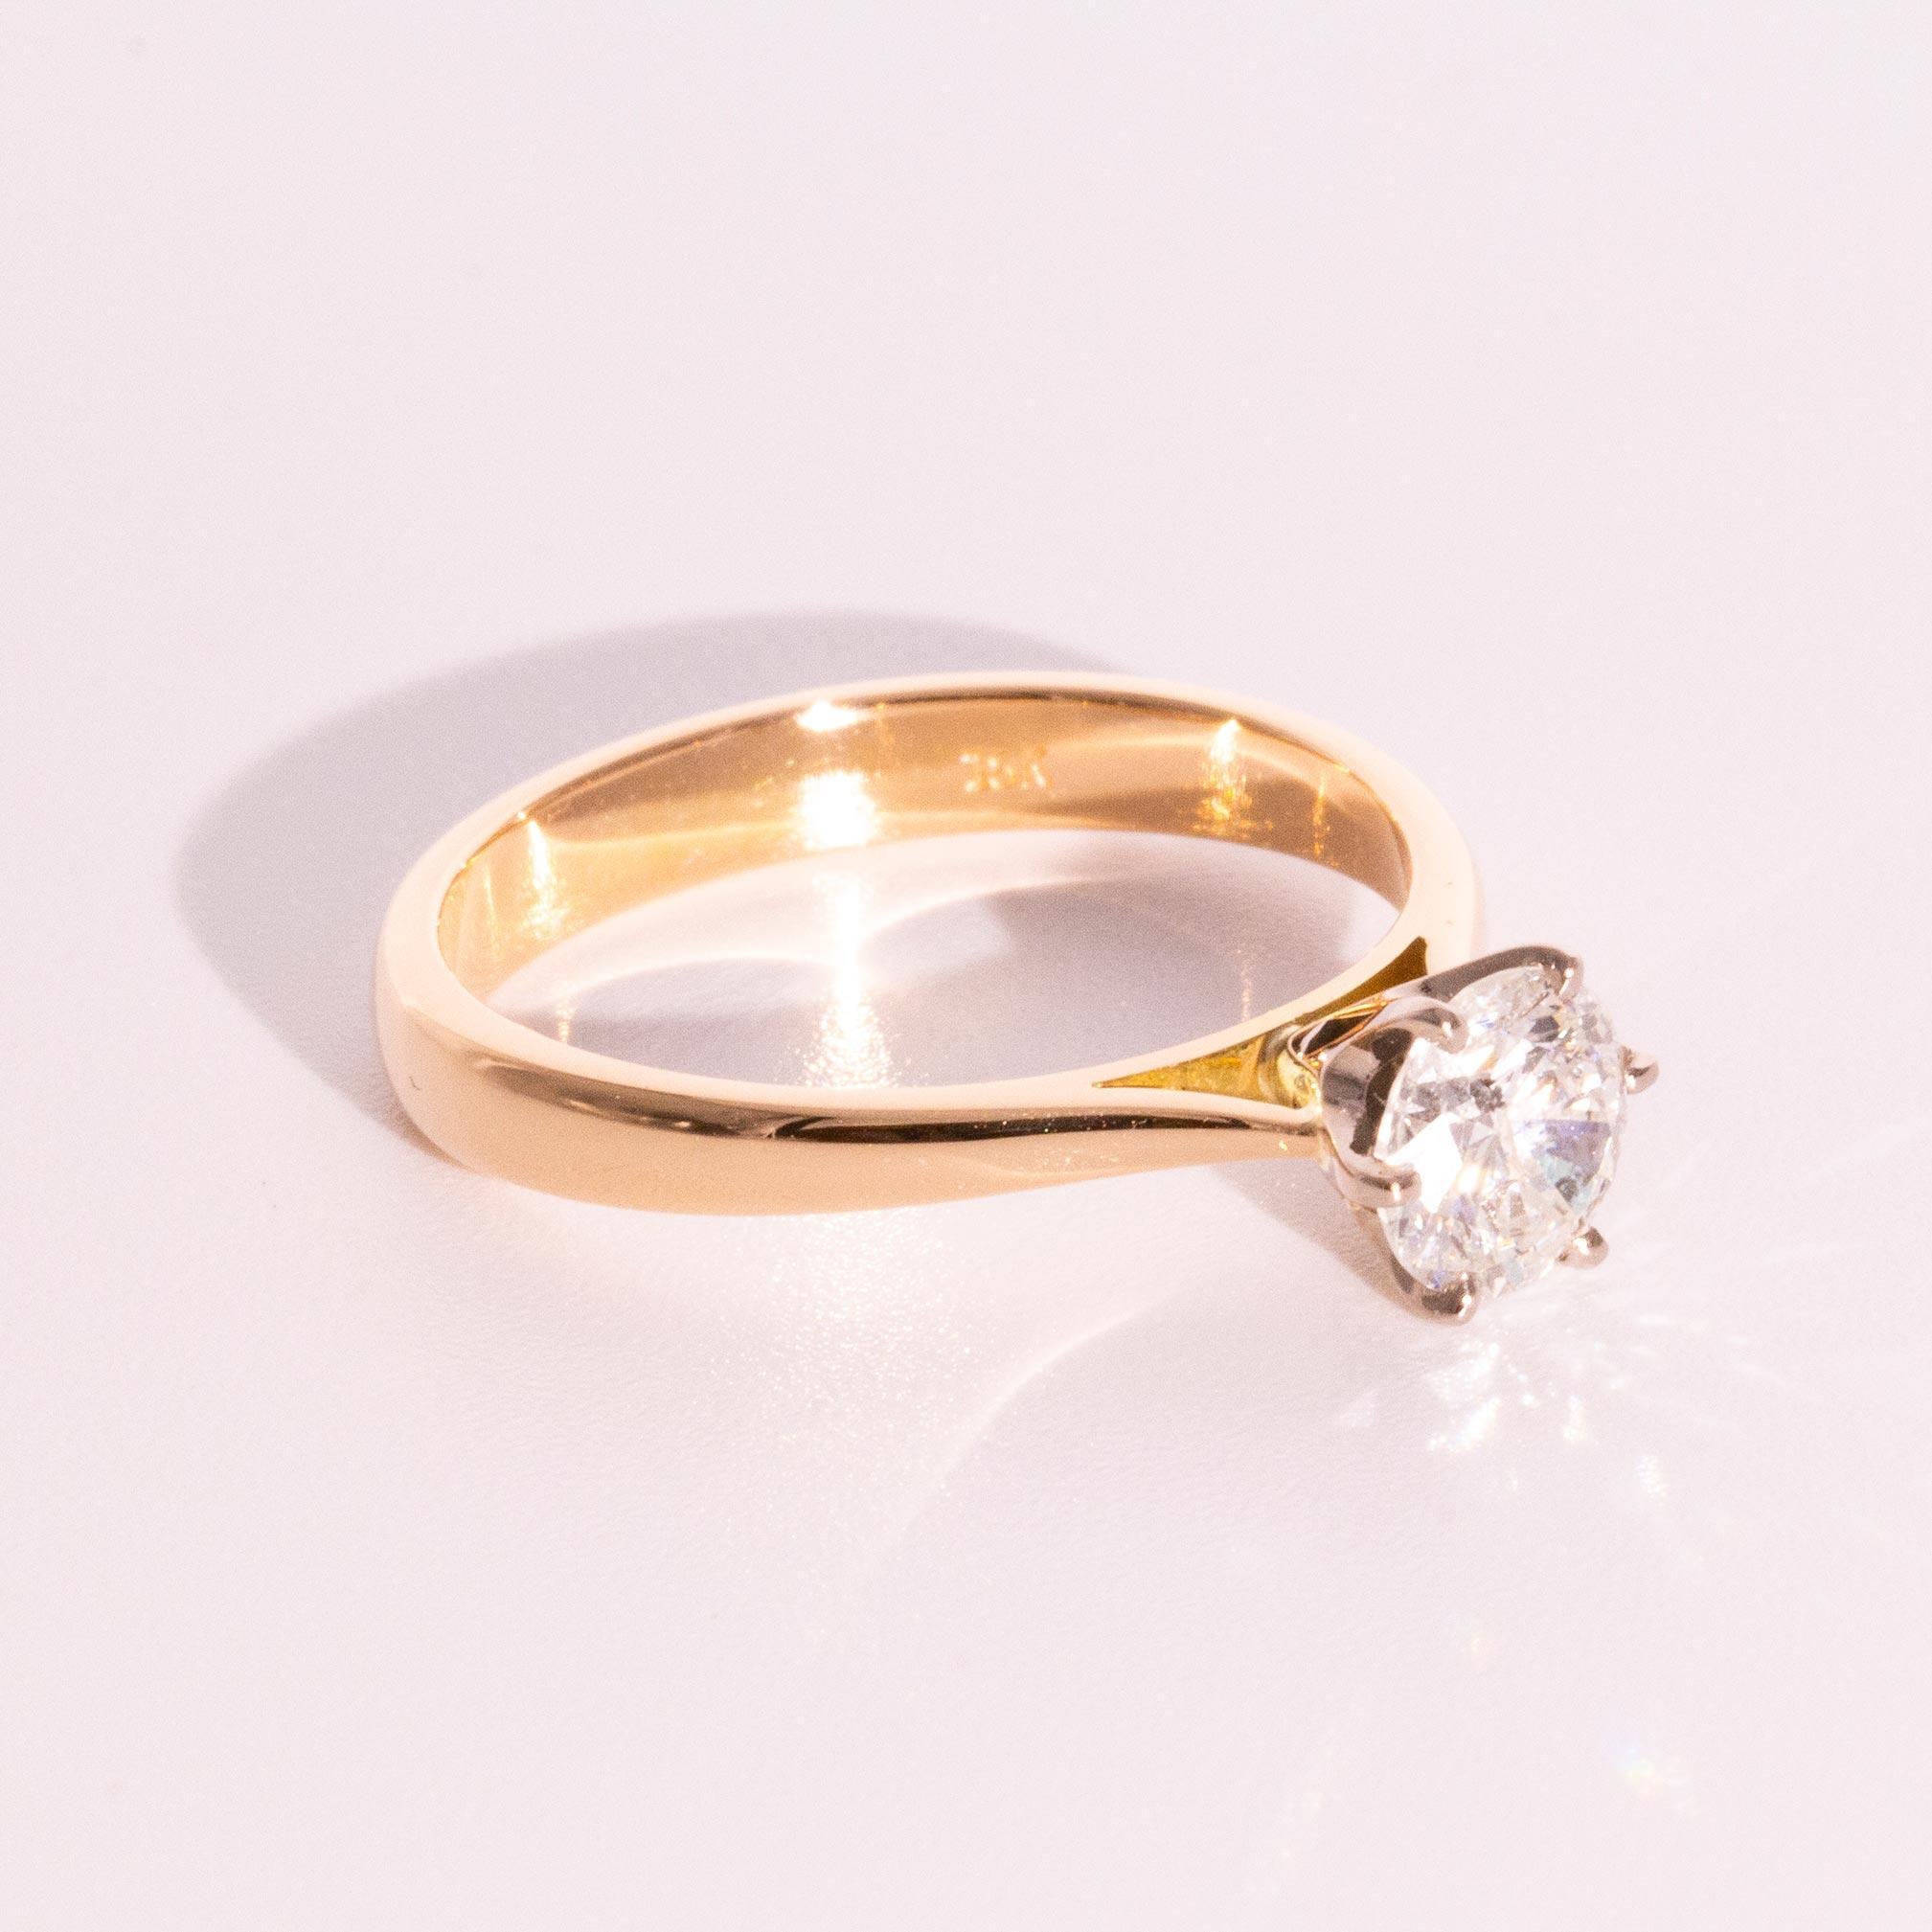 Crafted in 18 carat gold is the alluring solitaire engagement ring that show cases a sparkling 1.00 carat round brilliant cut diamond. We have named this gorgeous ring The Livia Ring. The Livia Ring is an understated elegant engagement ring with her